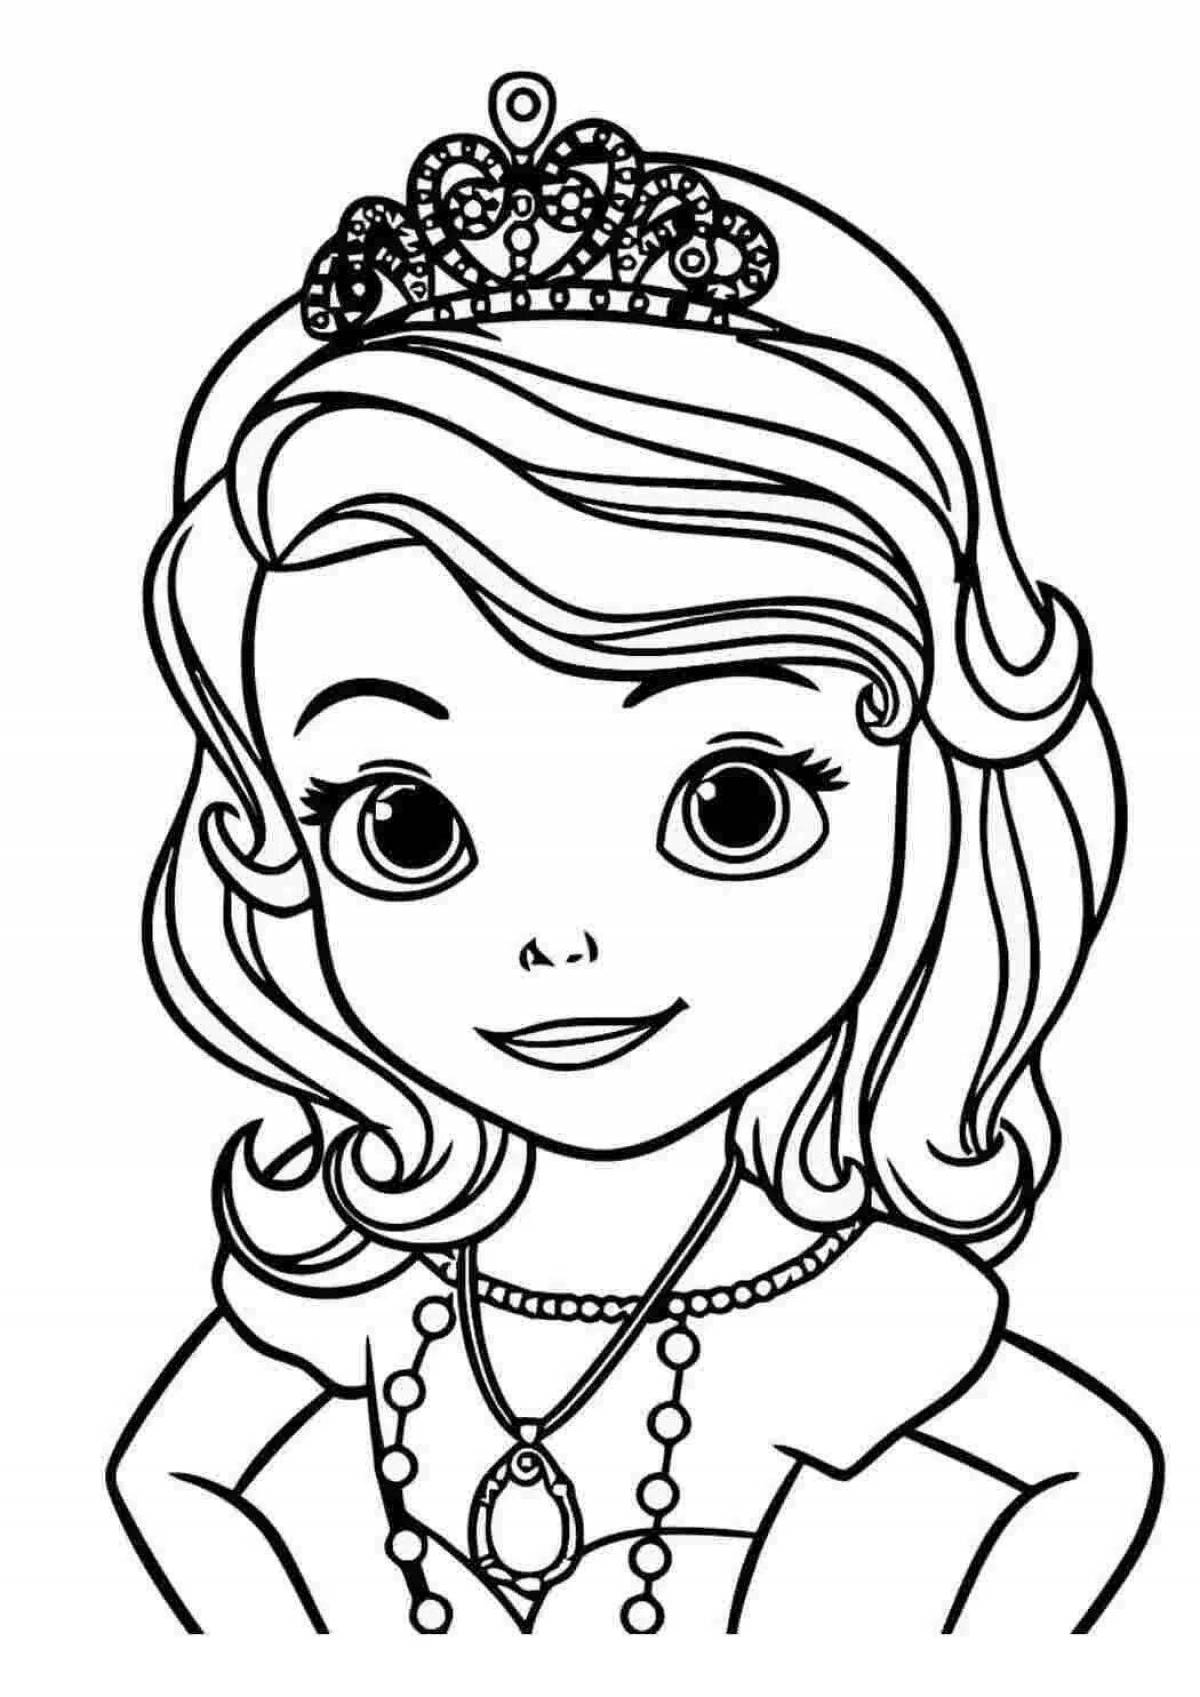 Sparkly coloring include princesses